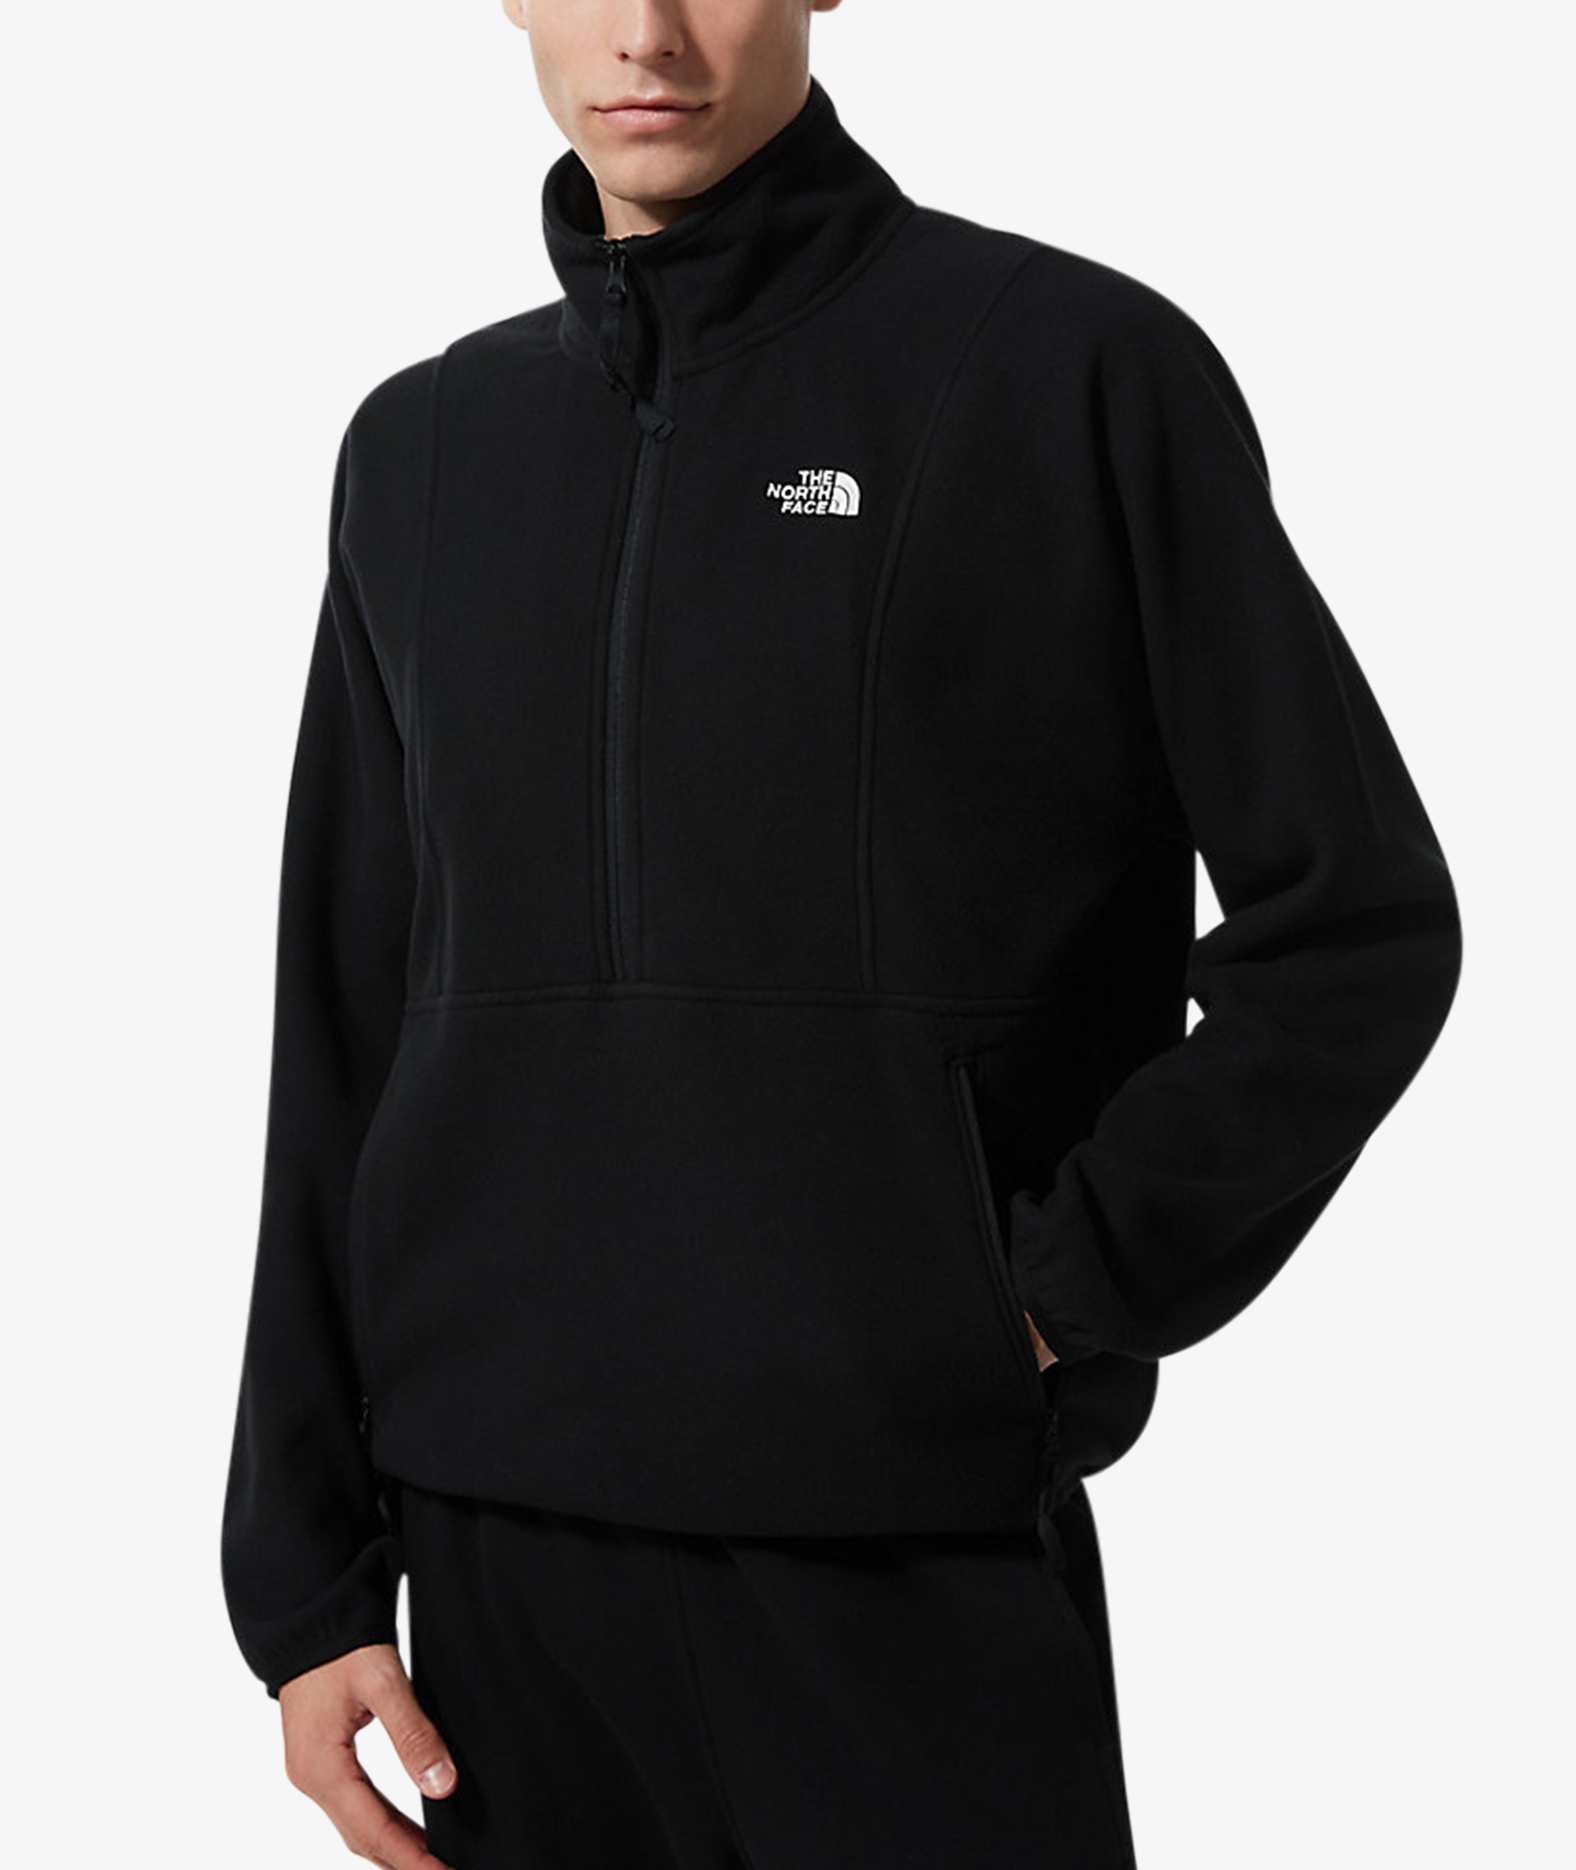 Norse Store | Shipping Worldwide - The North Face Attitude 1/4 Zip - Black